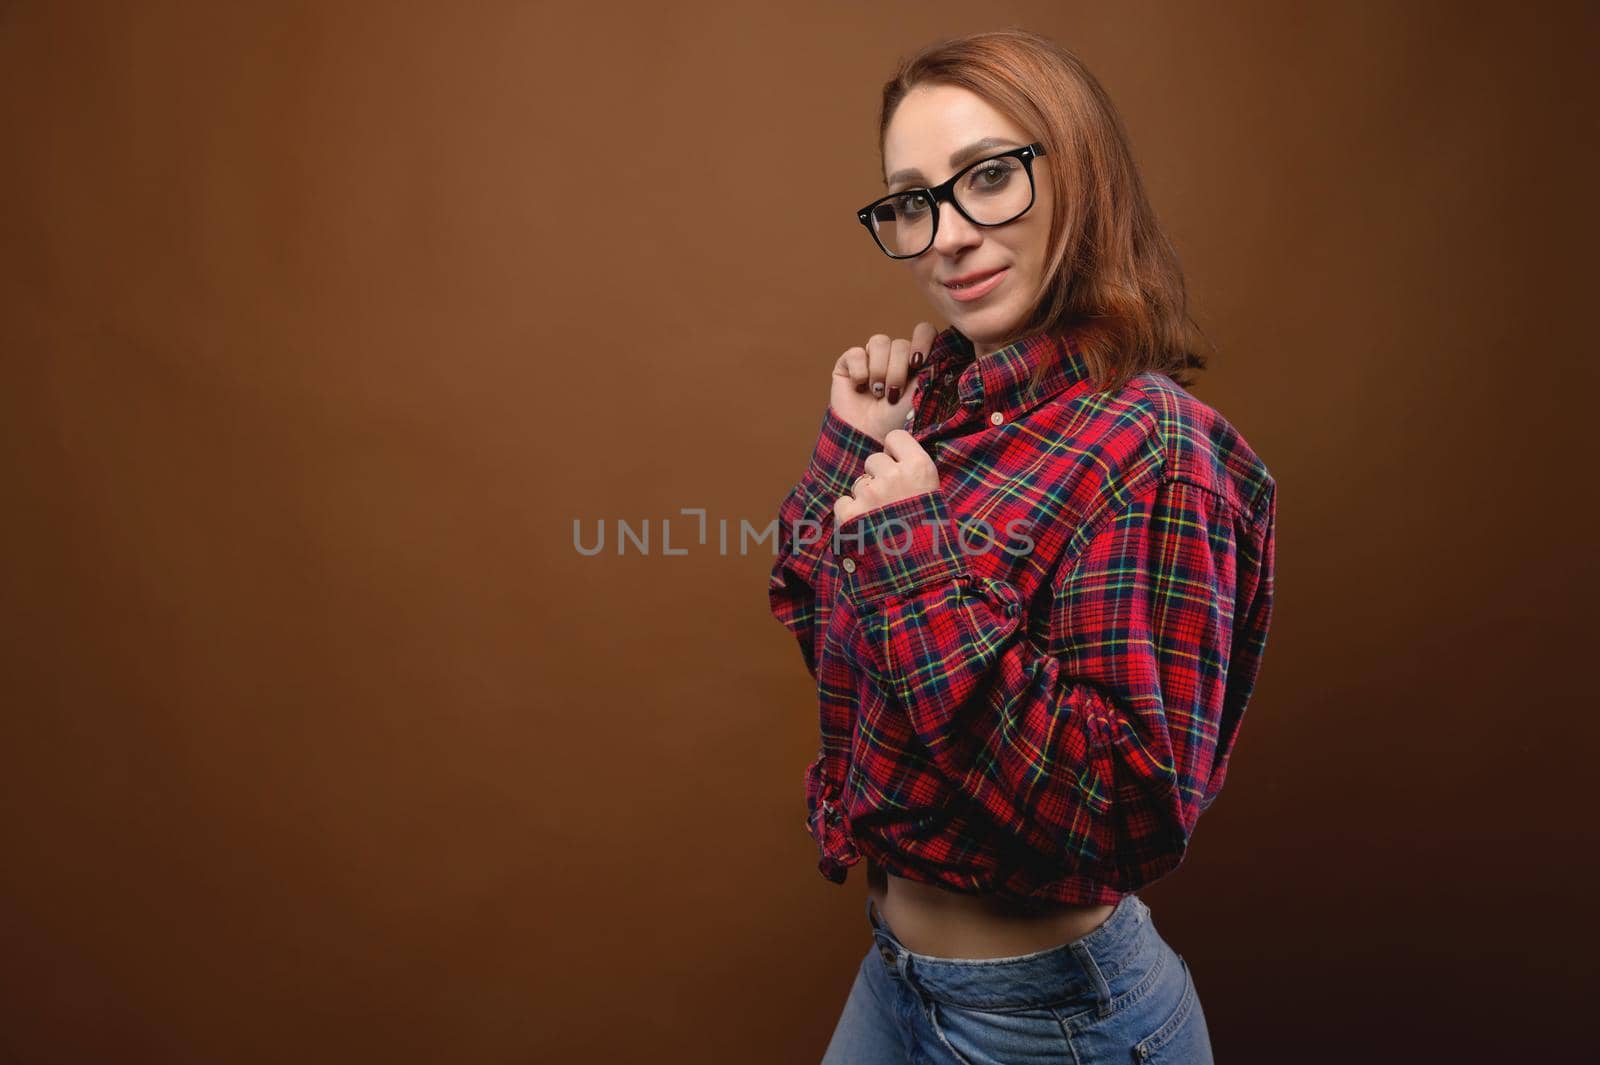 Portrait of a young attractive Caucasian woman in a red shirt and glasses on a brown background. Advertising glasses for improving vision and optics salons by yanik88